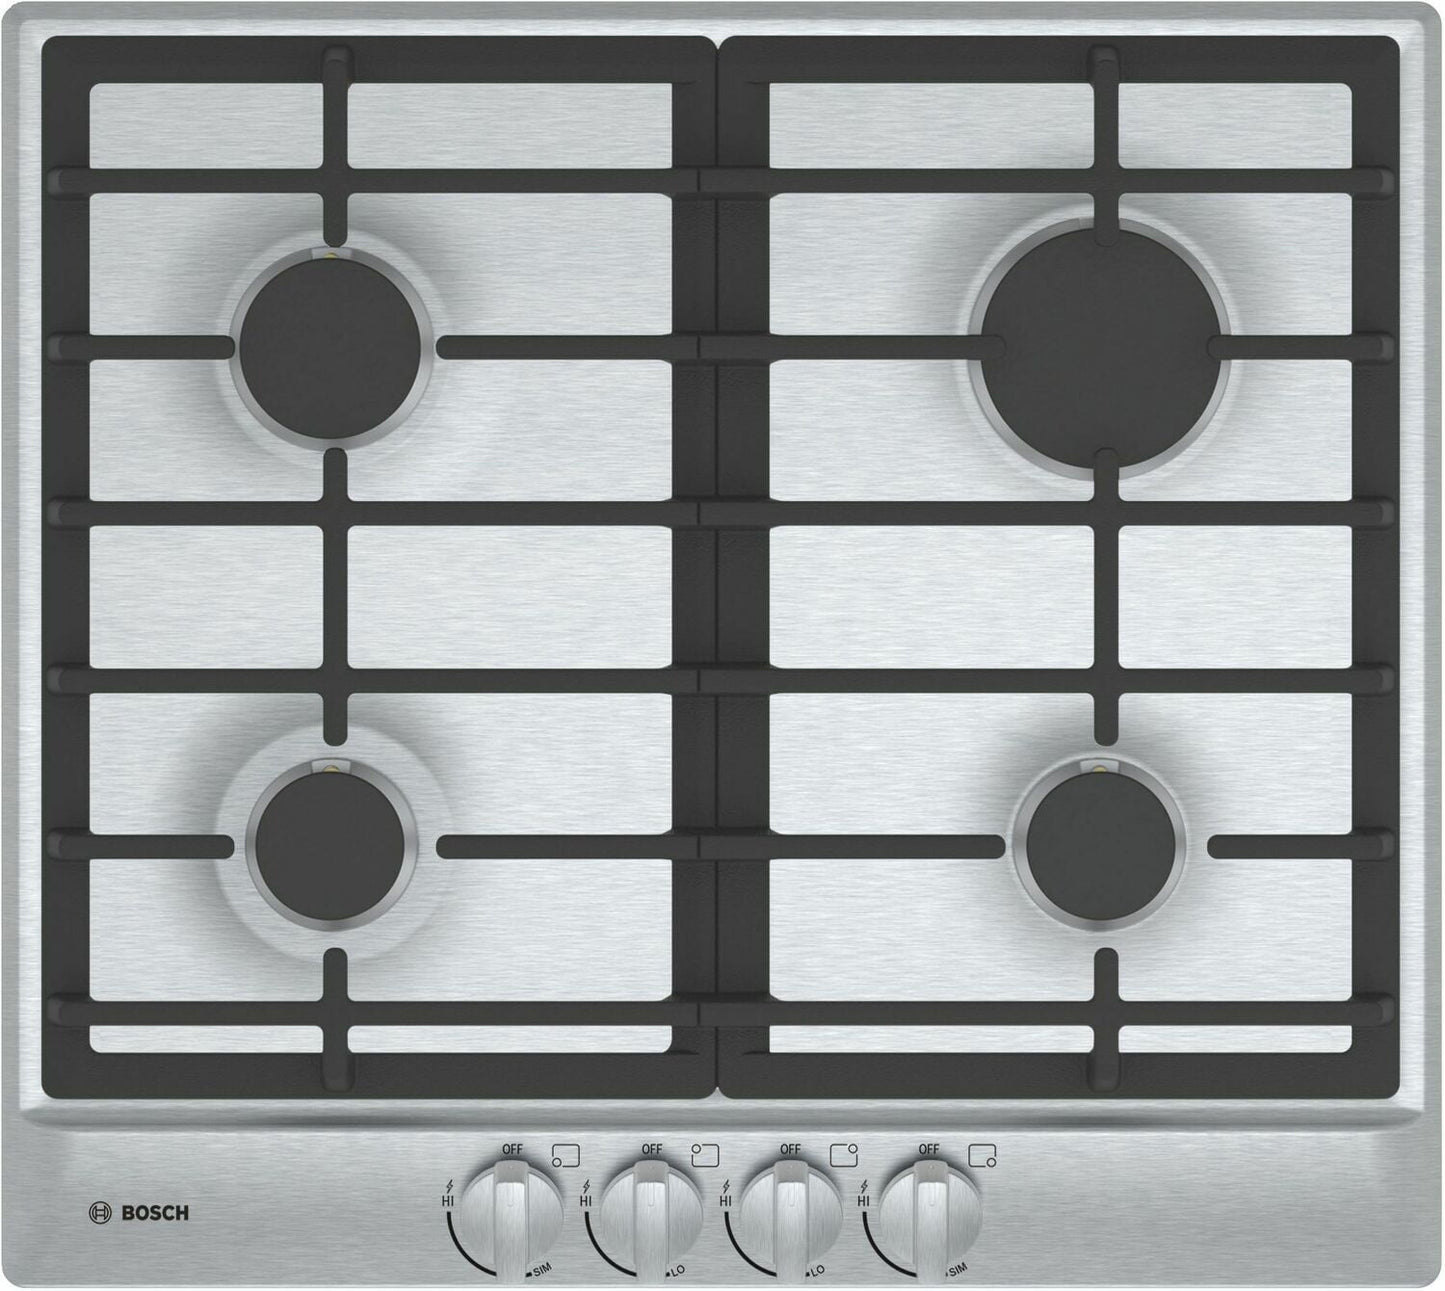 Bosch NGM5456UC 500 Series, 24" Gas Cooktop, 4 Burners, Stainless Steel